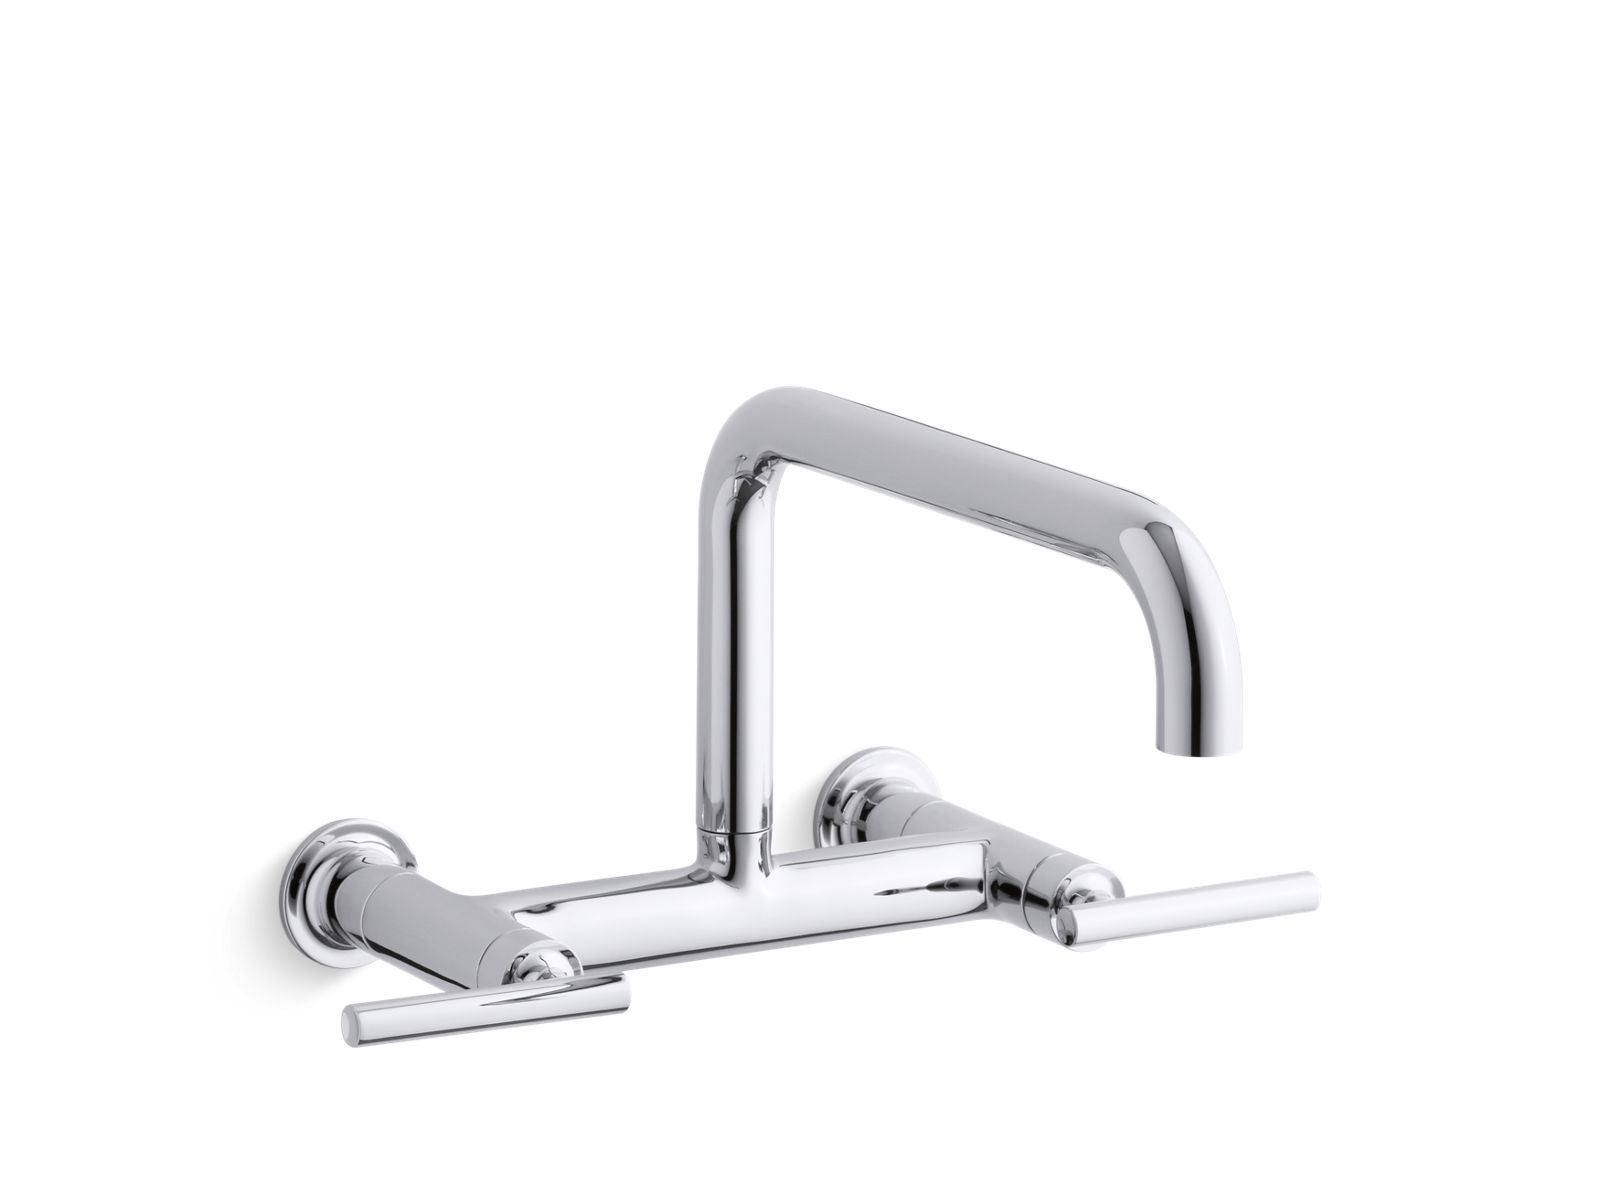 Wall mount kitchen faucet by Kohler